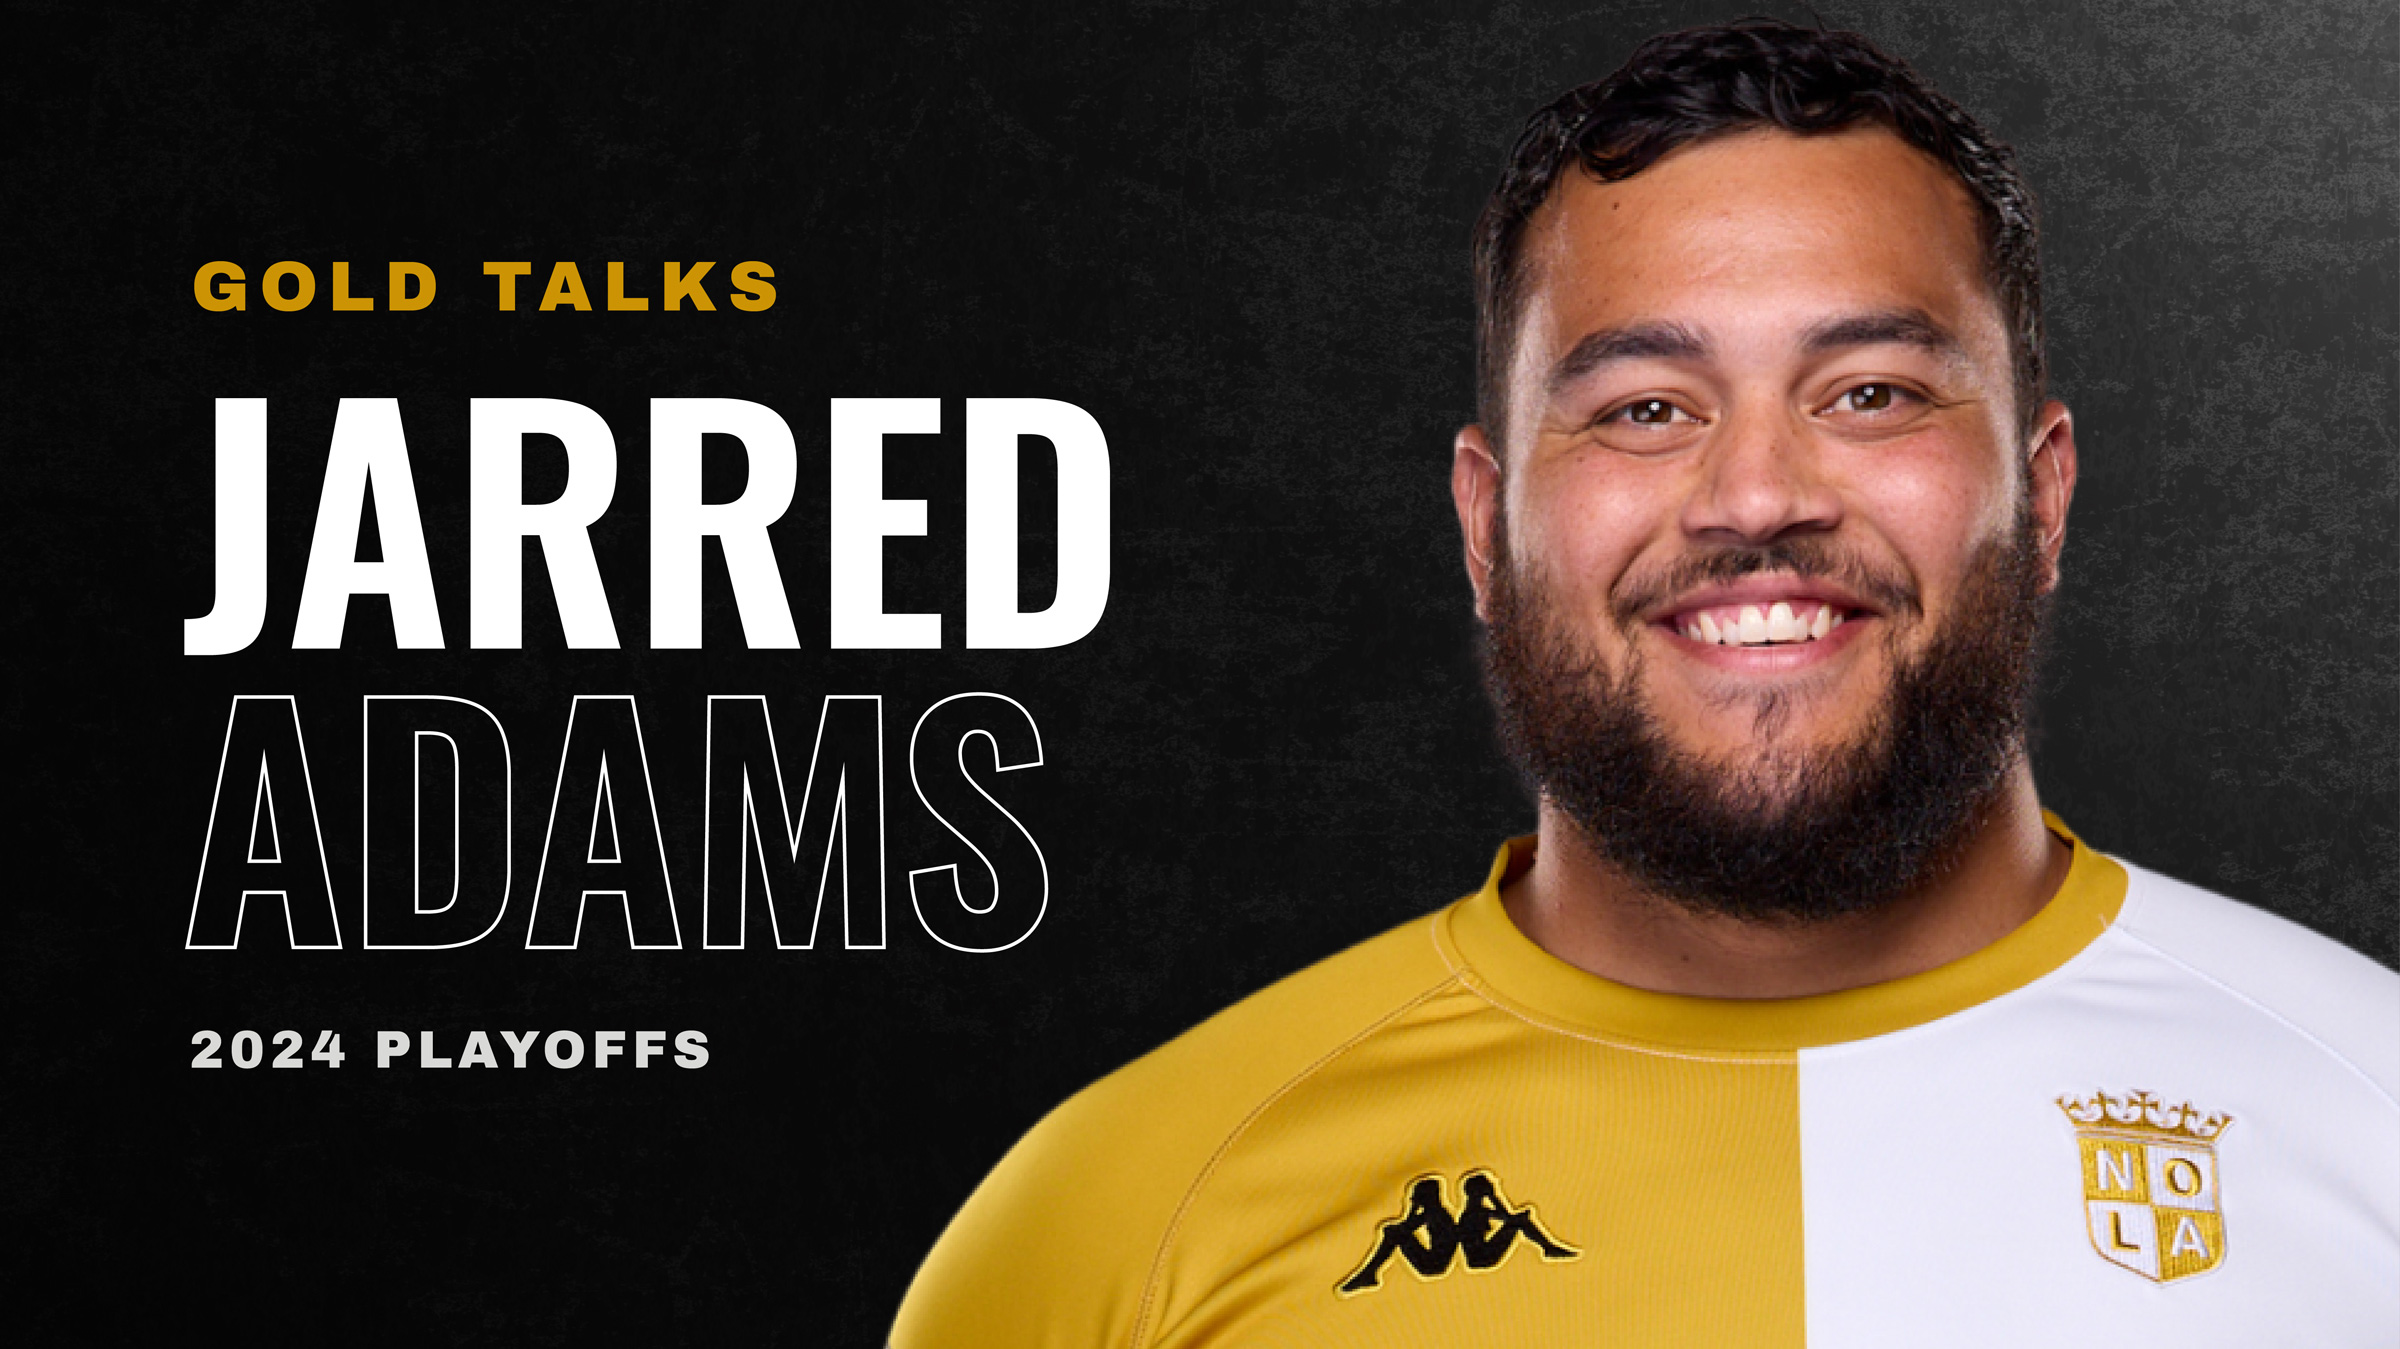 GOLD TALKS: Jarred Adams on Rugby, Resilience, and the Road to Playoffs